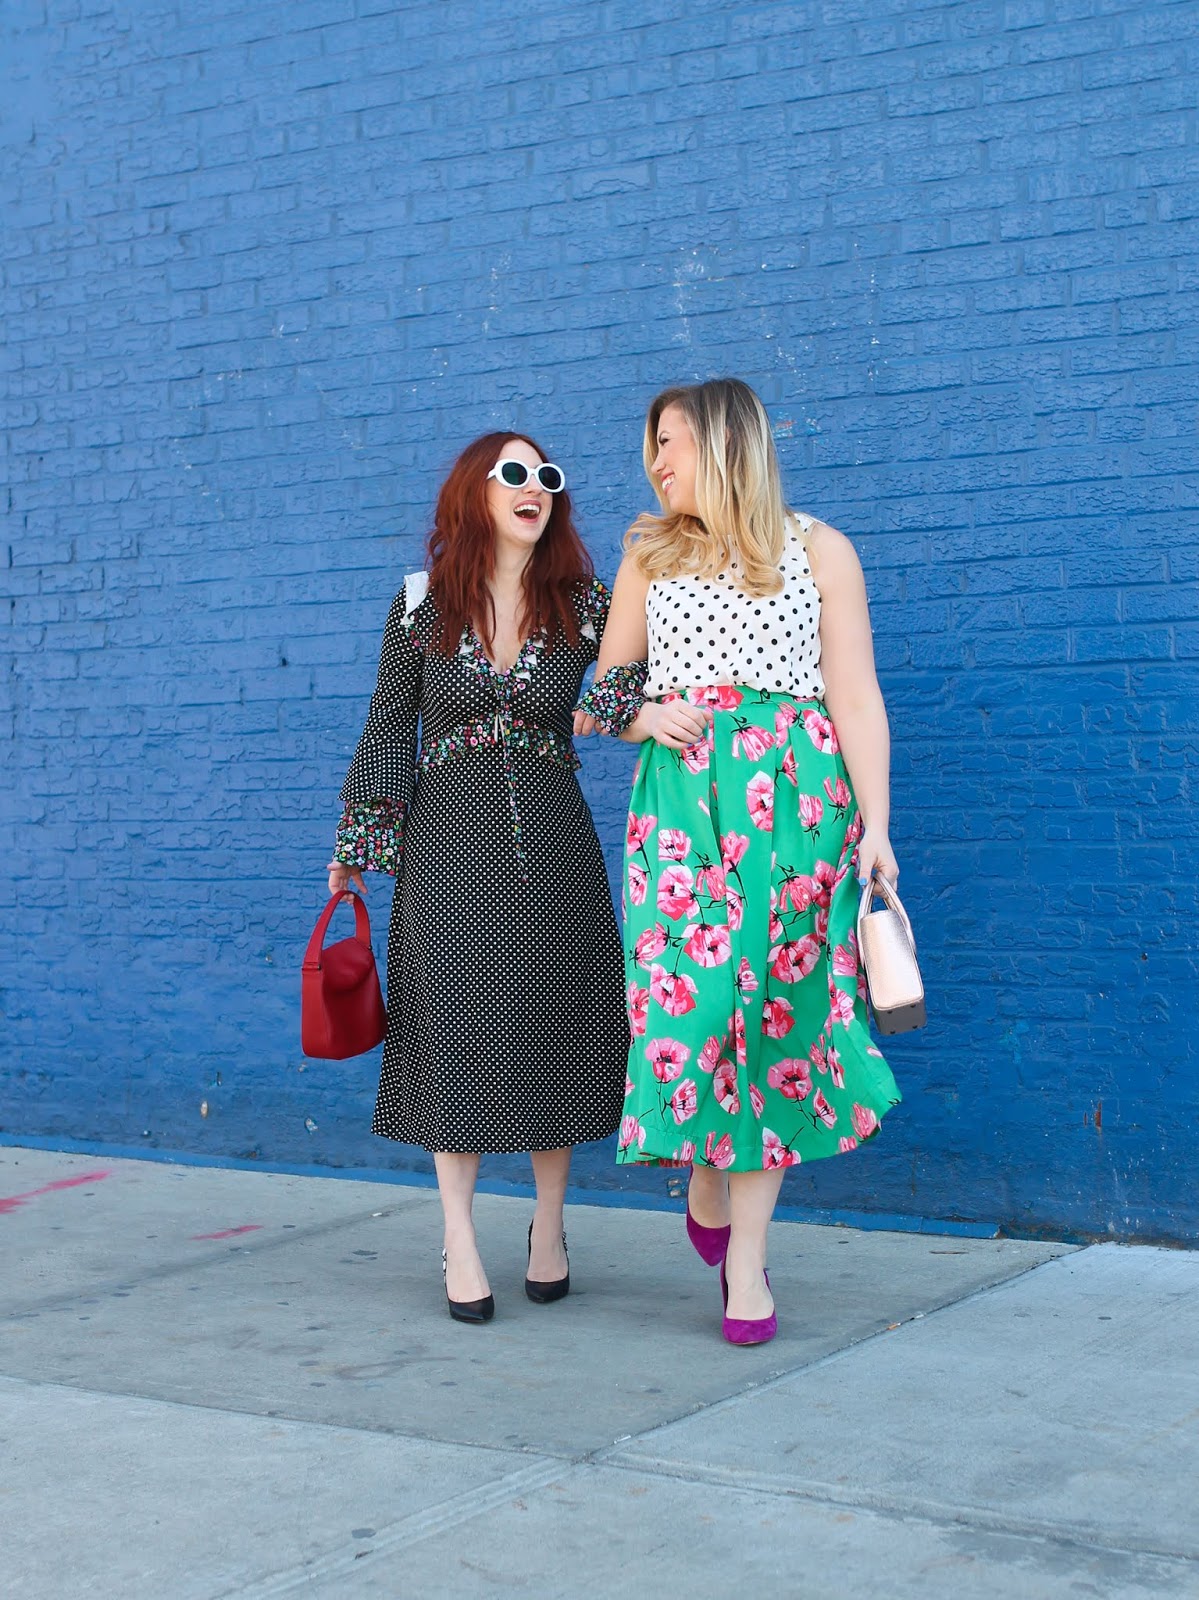 Print Mixing Made Easy: How To Wear Florals and Polka Dots - TfDiaries